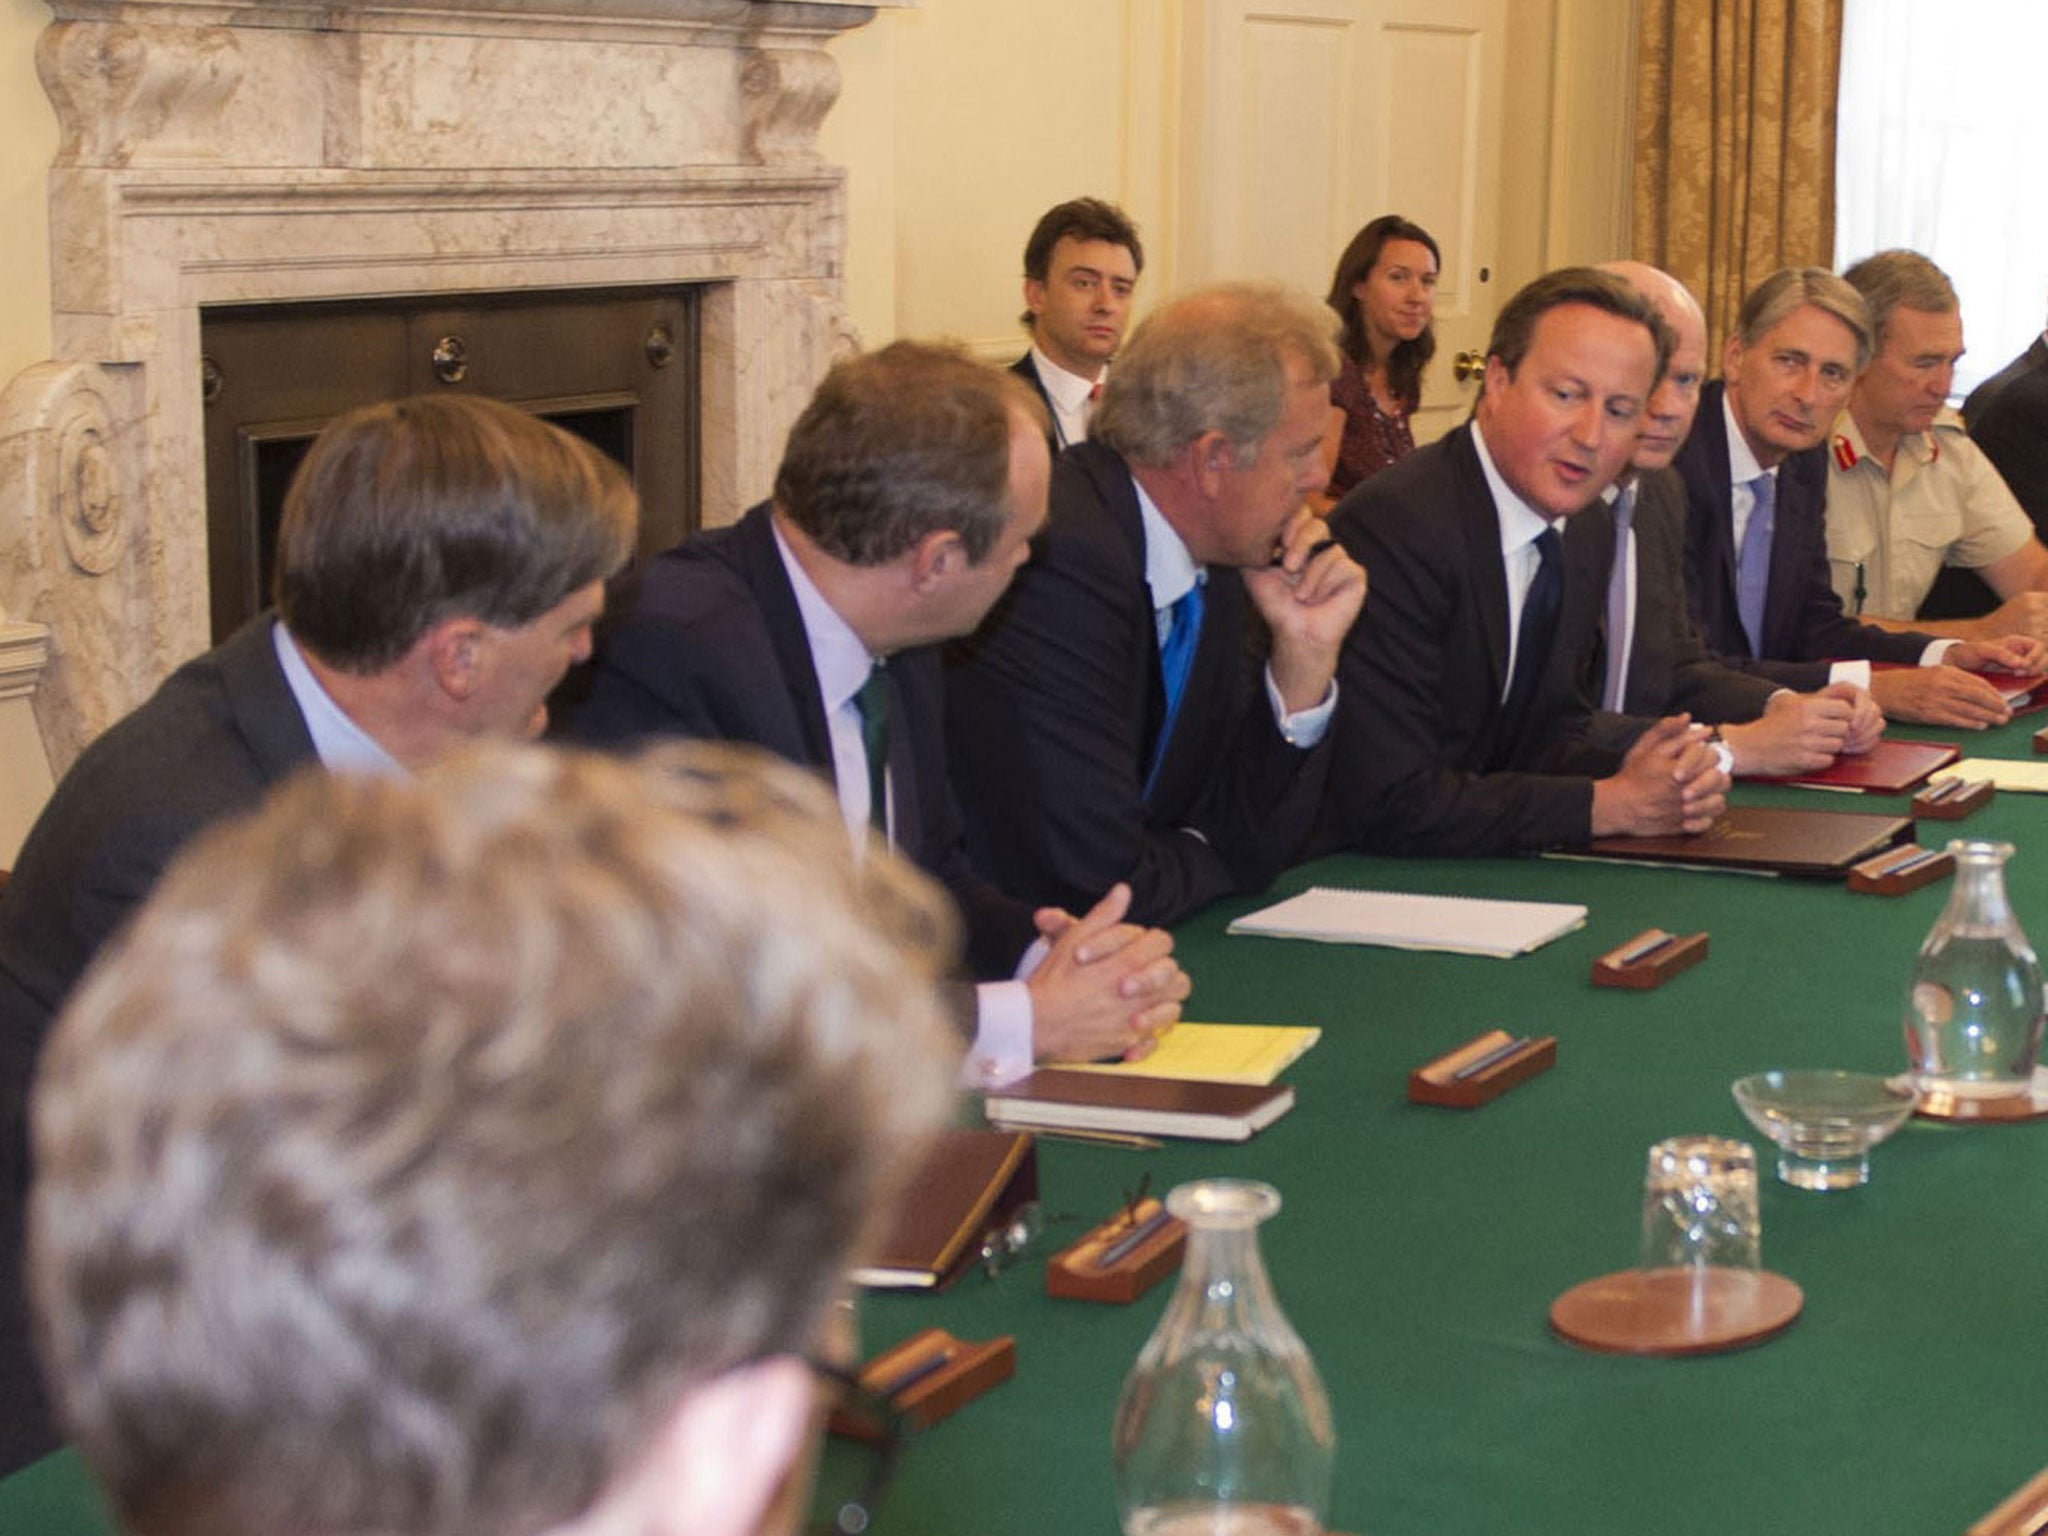 David Cameron chairs a meeting of the National Security Council at 10 Downing Street in central London to discuss a response to the situation in Syria